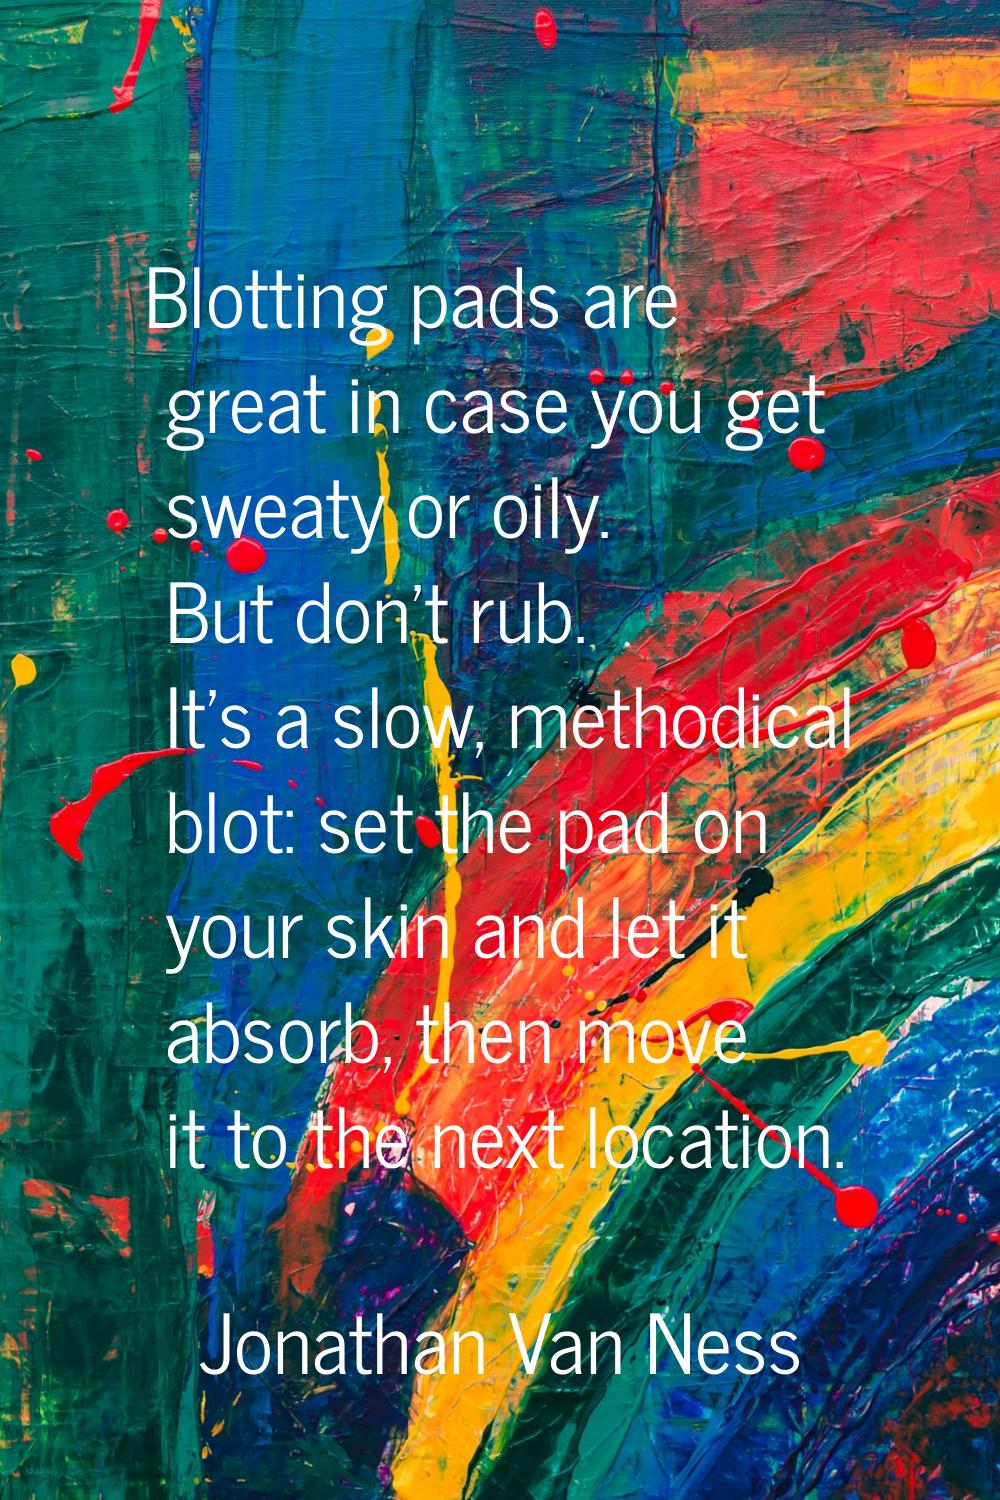 Blotting pads are great in case you get sweaty or oily. But don't rub. It's a slow, methodical blot